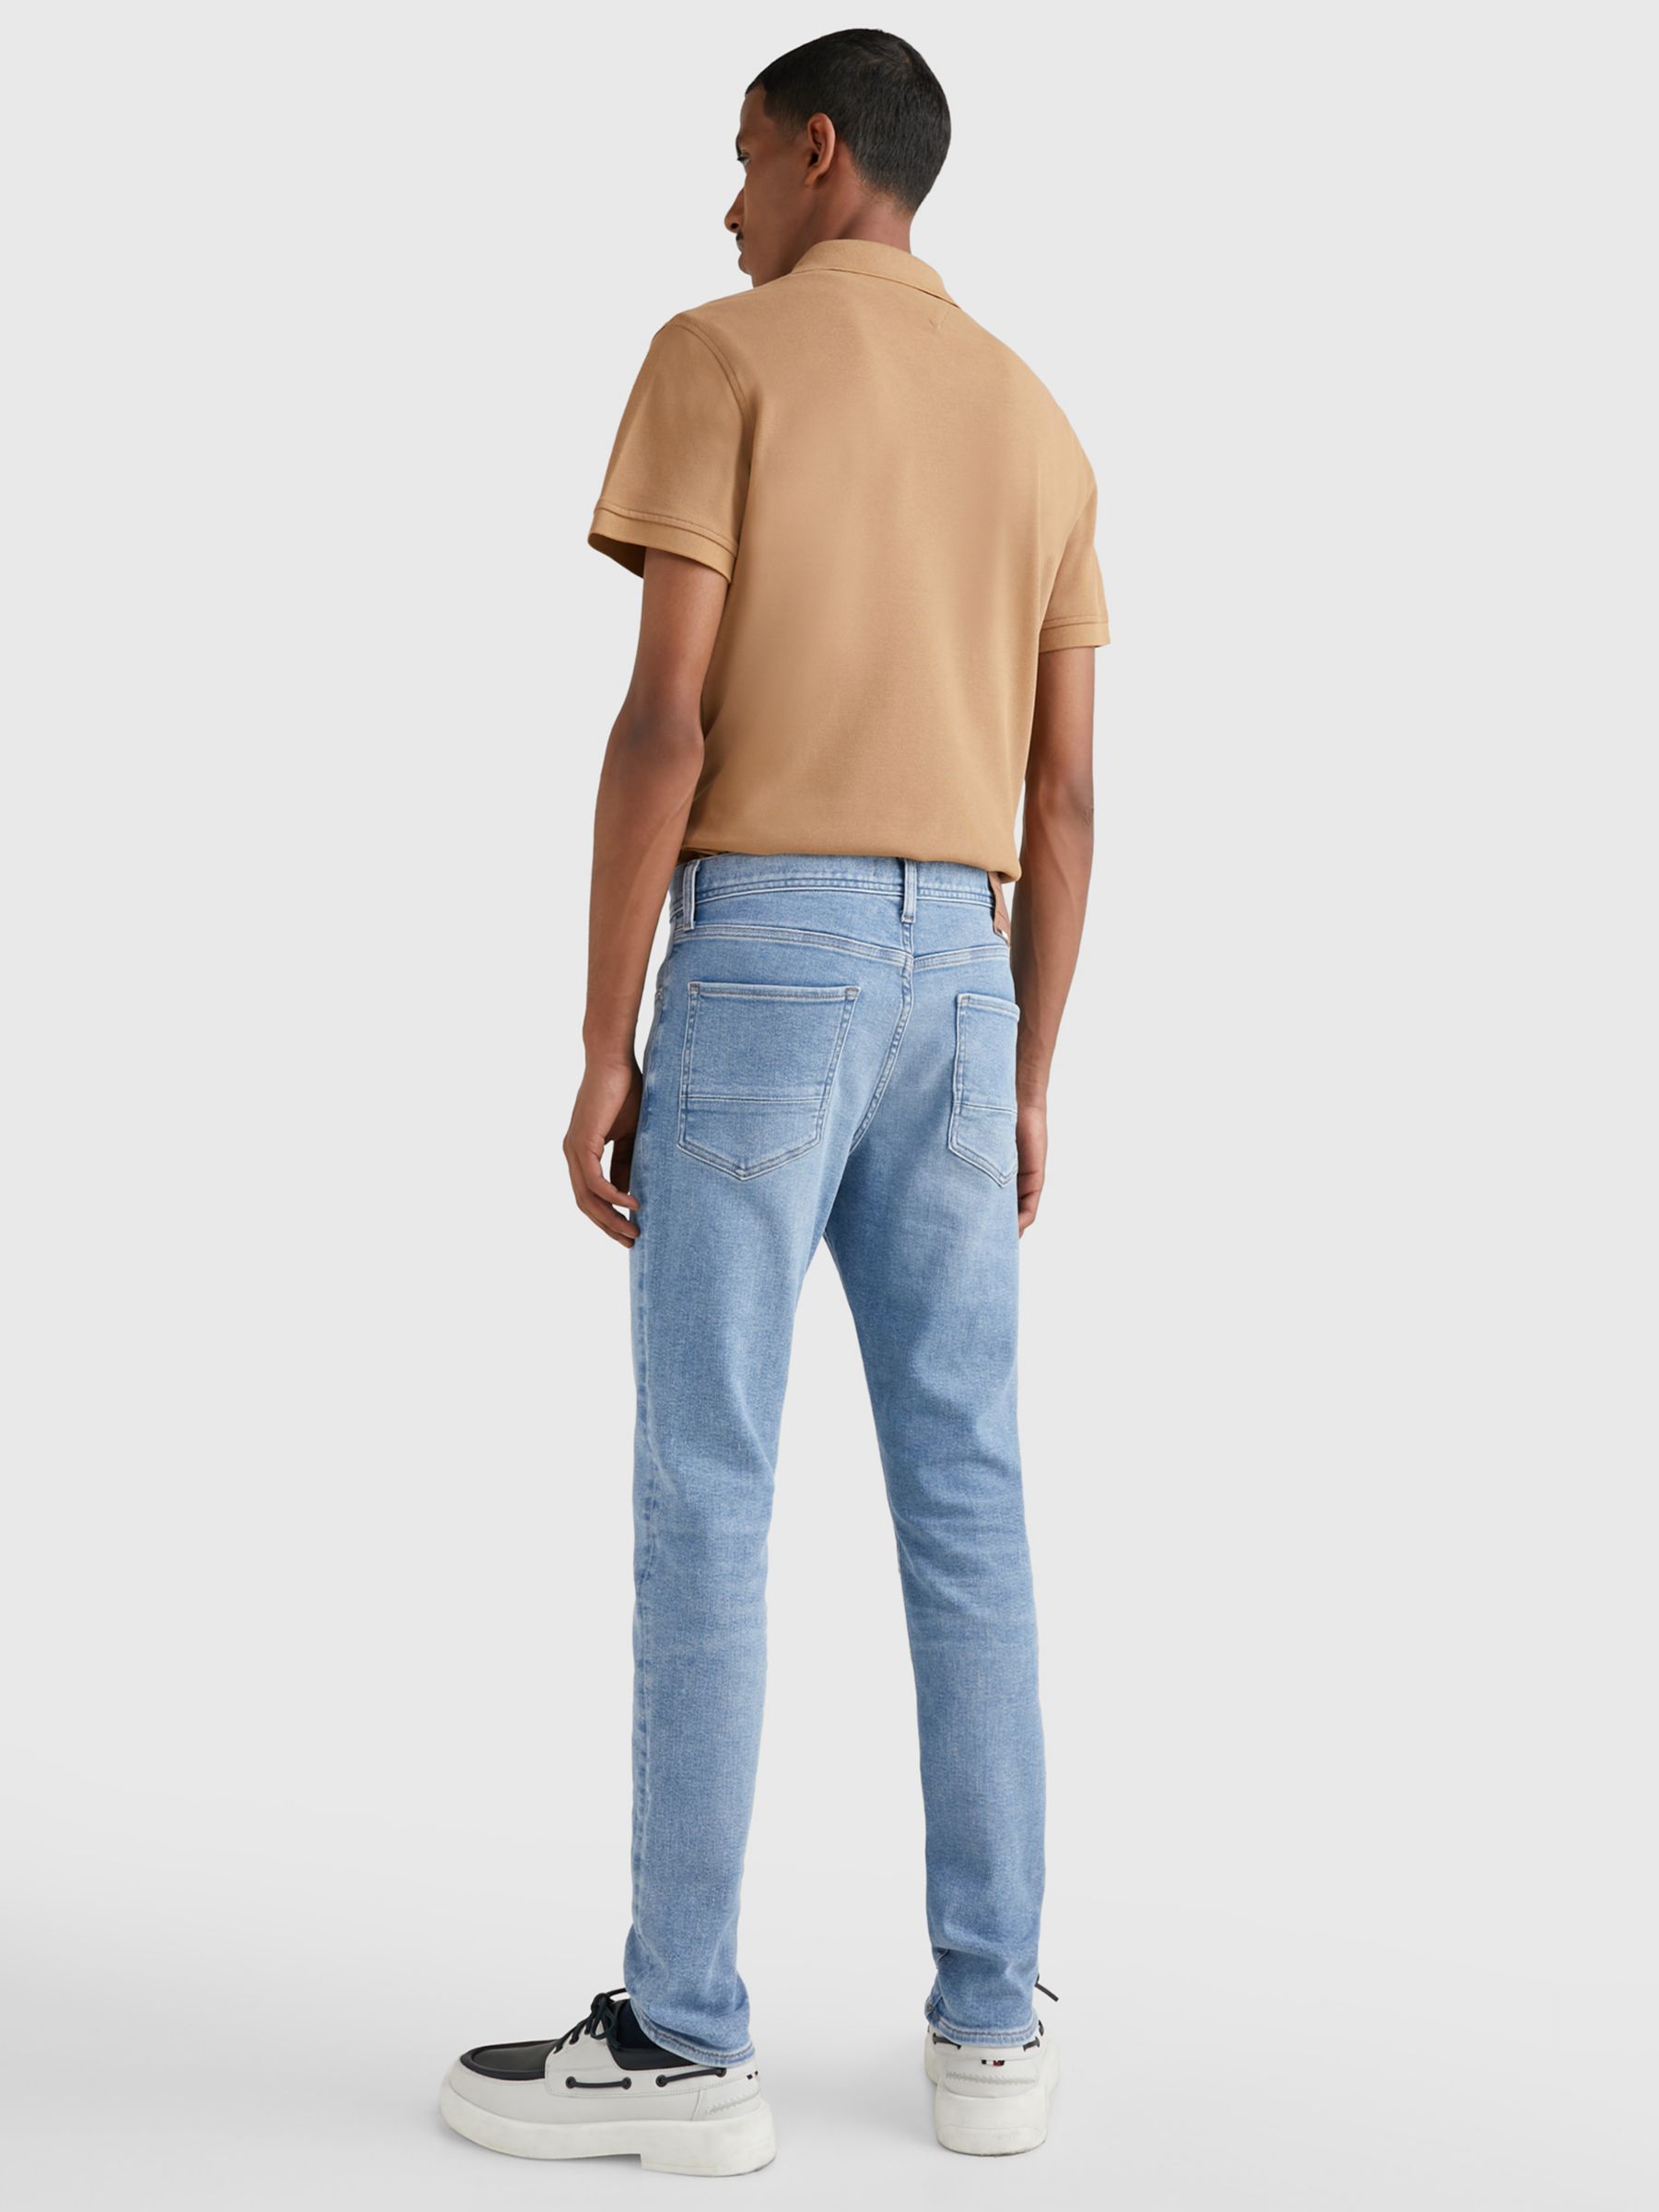 Tommy Hilfiger Extra Slim Layton Jeans, Blue at Lewis & Partners